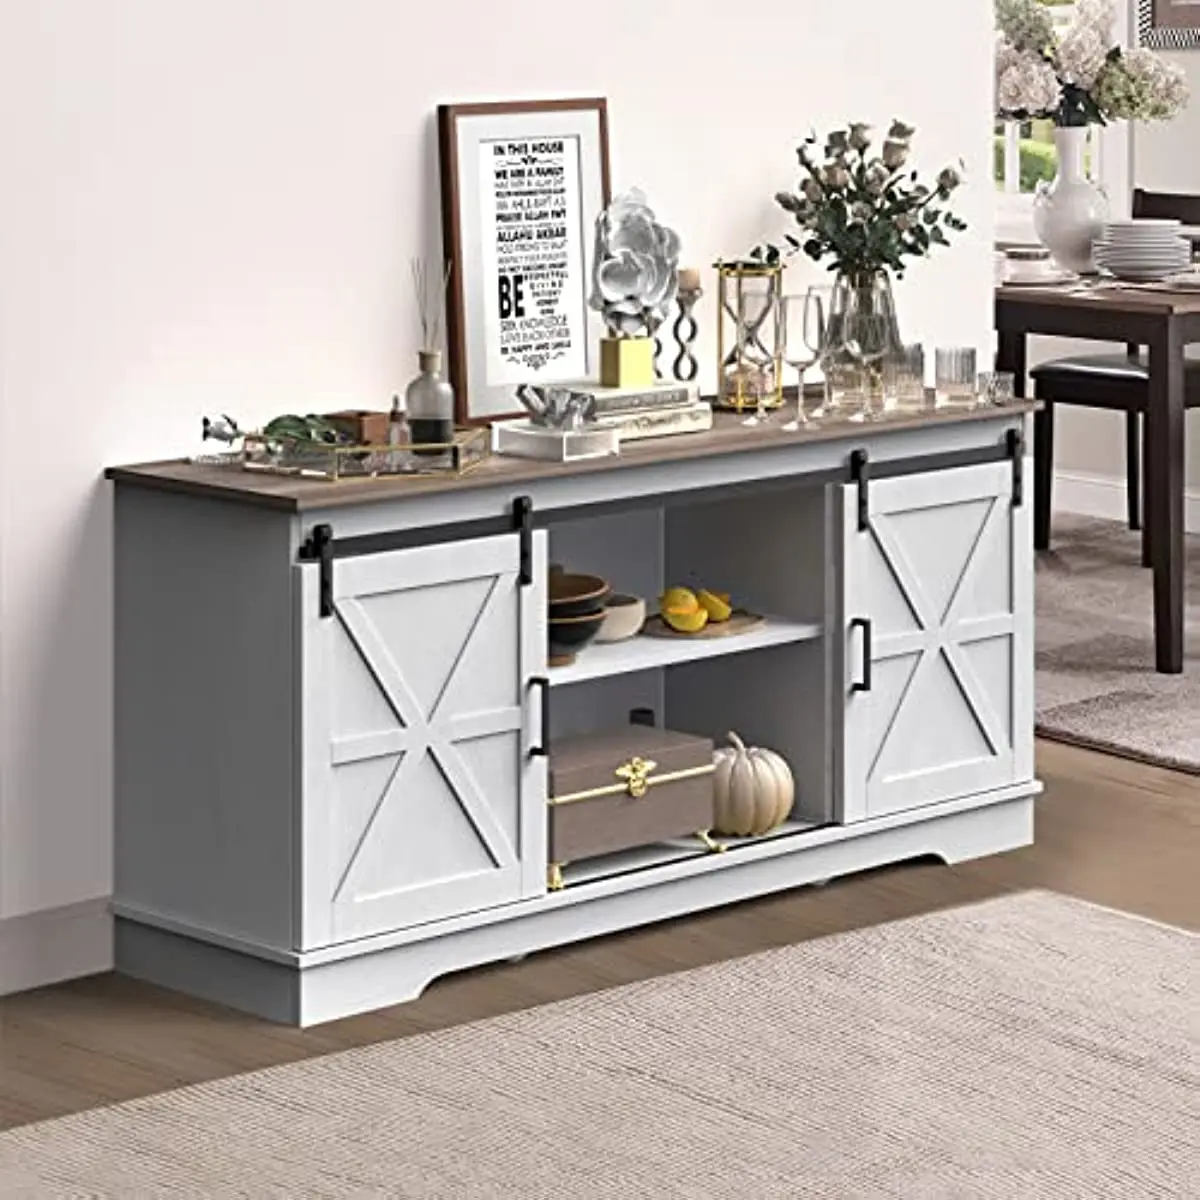 

Farmhouse Sliding Barn Door Coffee Bar Sideboard Buffet Cabinet with Capacity 300 lbs for Home Kitchen Dinning Living Room